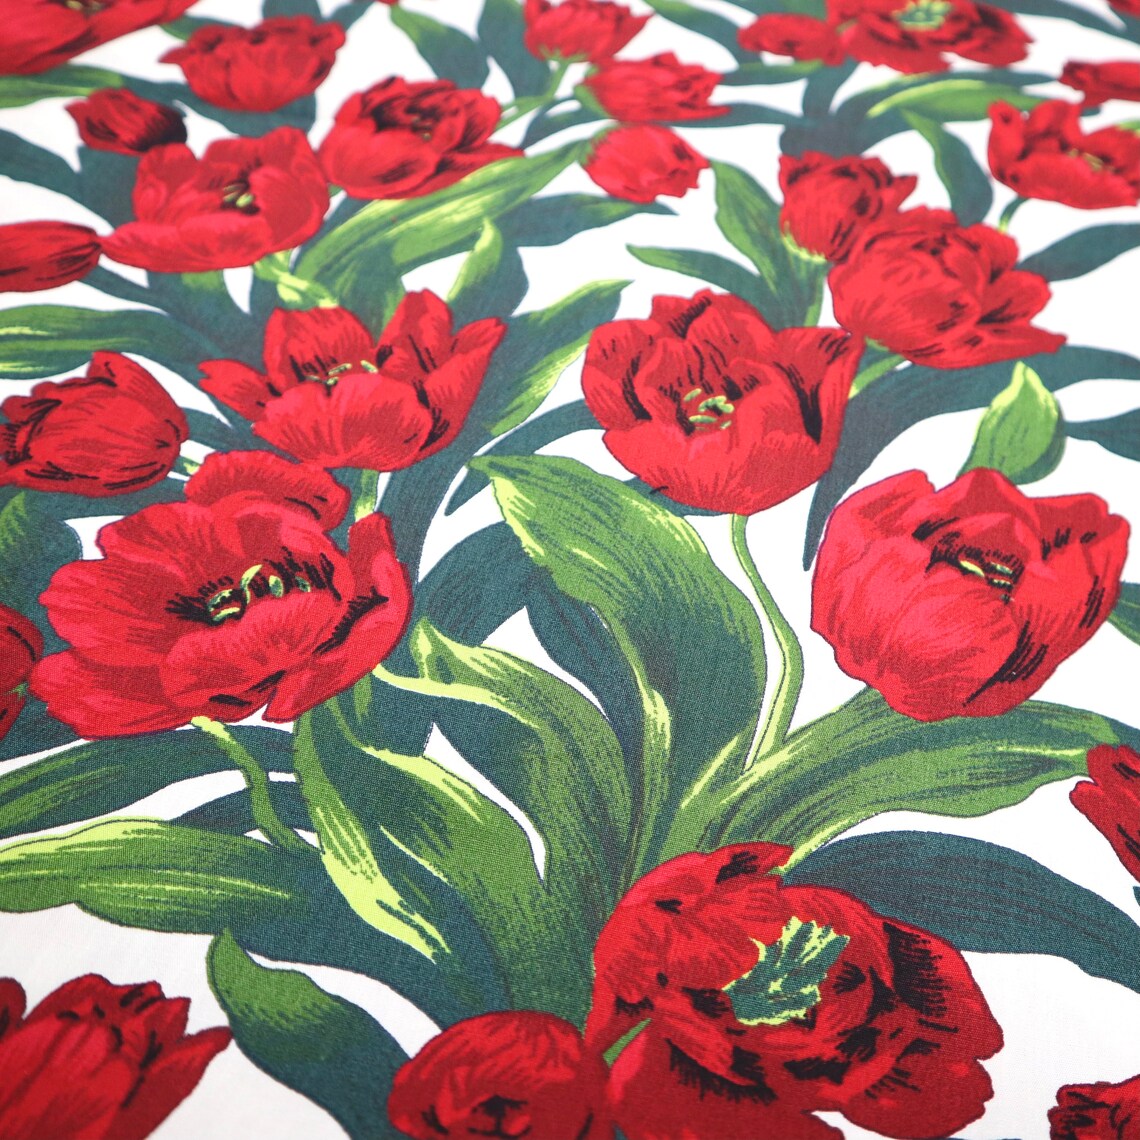 Red Tulips Cotton Fabric Red Tulip Printed on White | Etsy